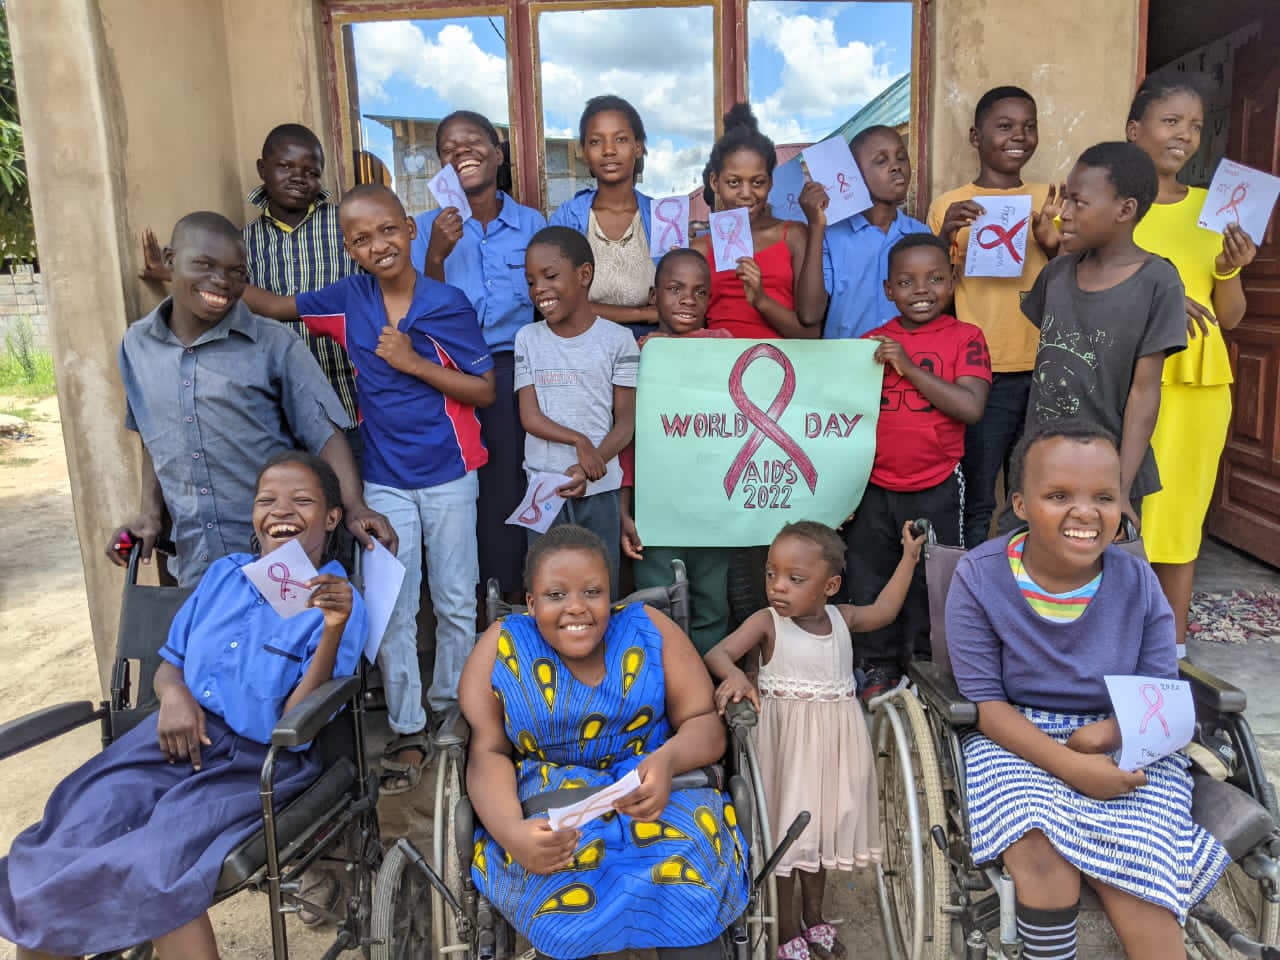 Read for Rose Special Education Program students recognize World AIDS Day. Each girl and boy has a customized learning plan, an opportunity very few children with disabilities have in Zambia.